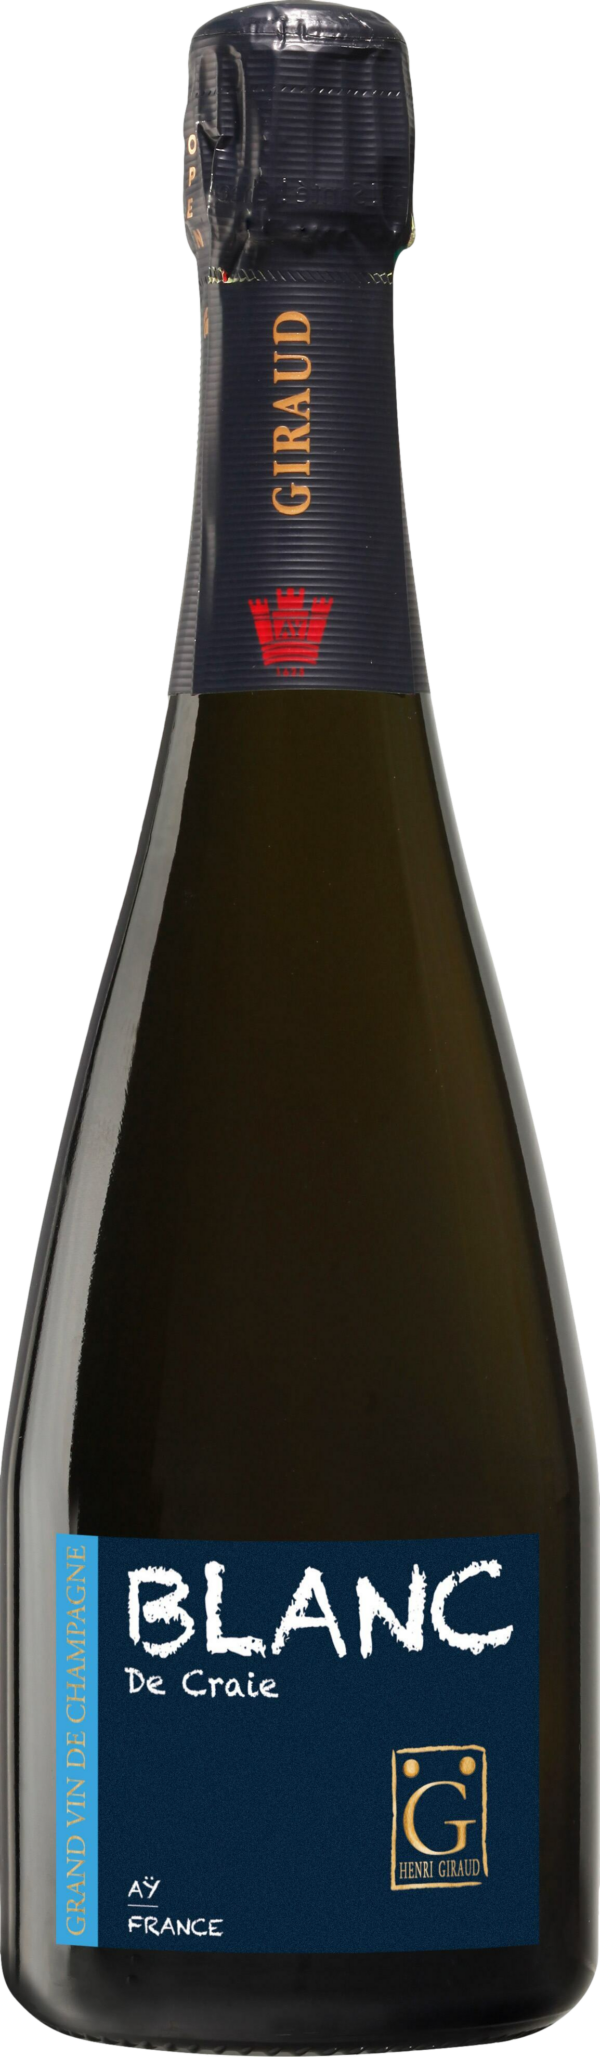 Product image of Champagne Henri Giraud Blanc de Craie from 8wines